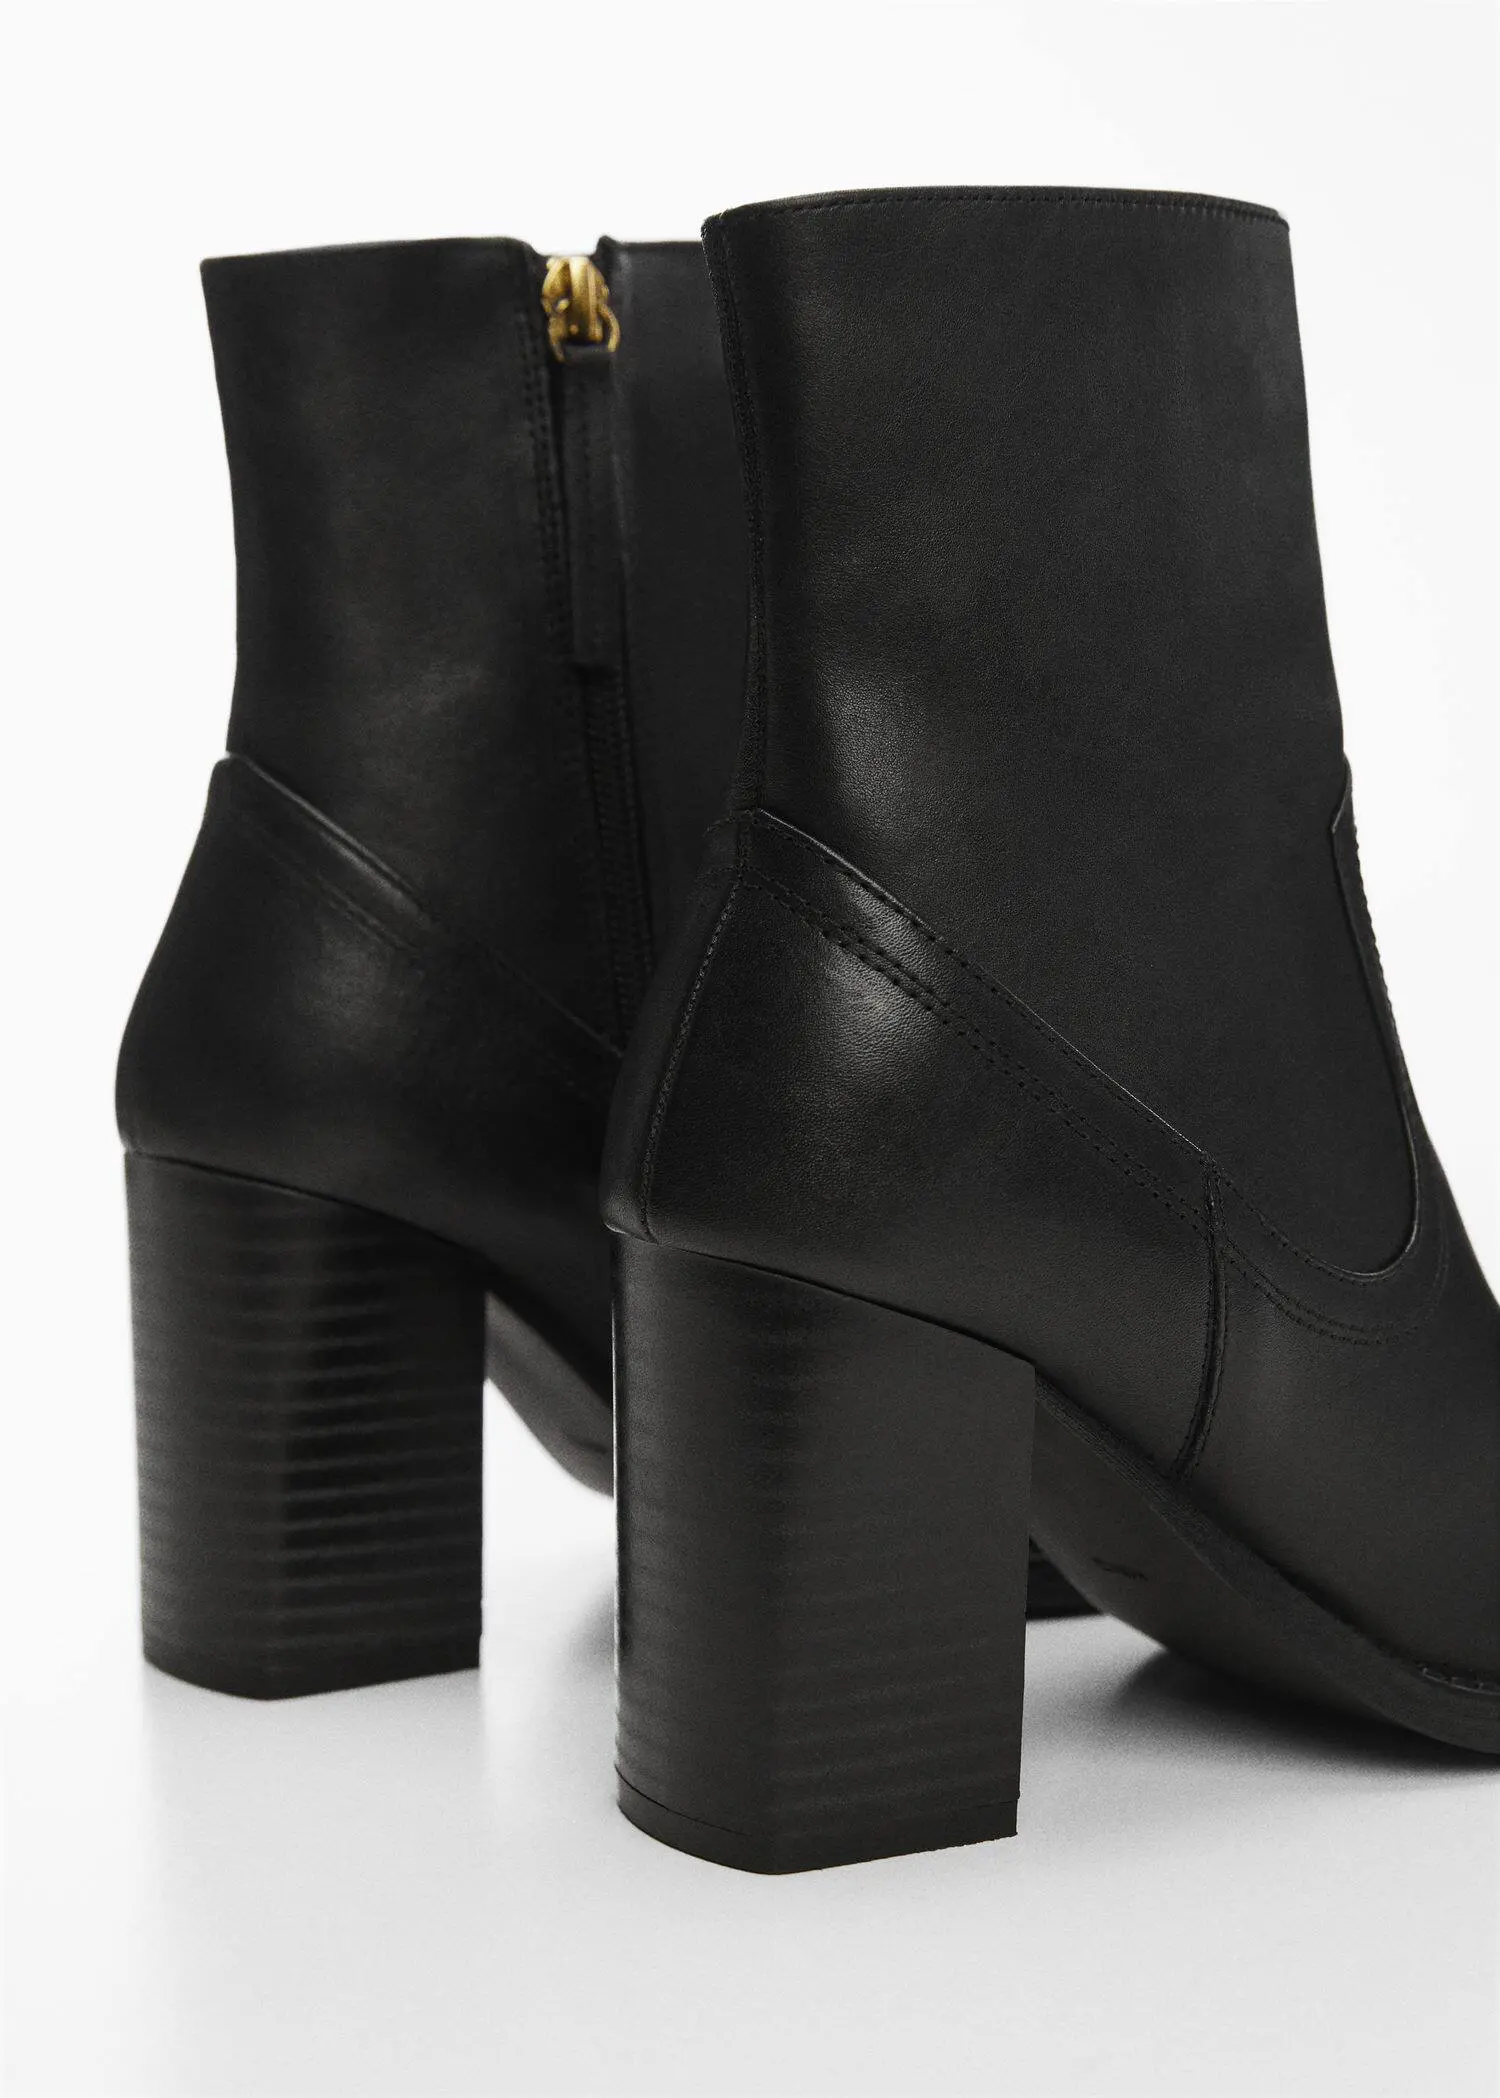 Mango Leather ankle boots with block heel. 2